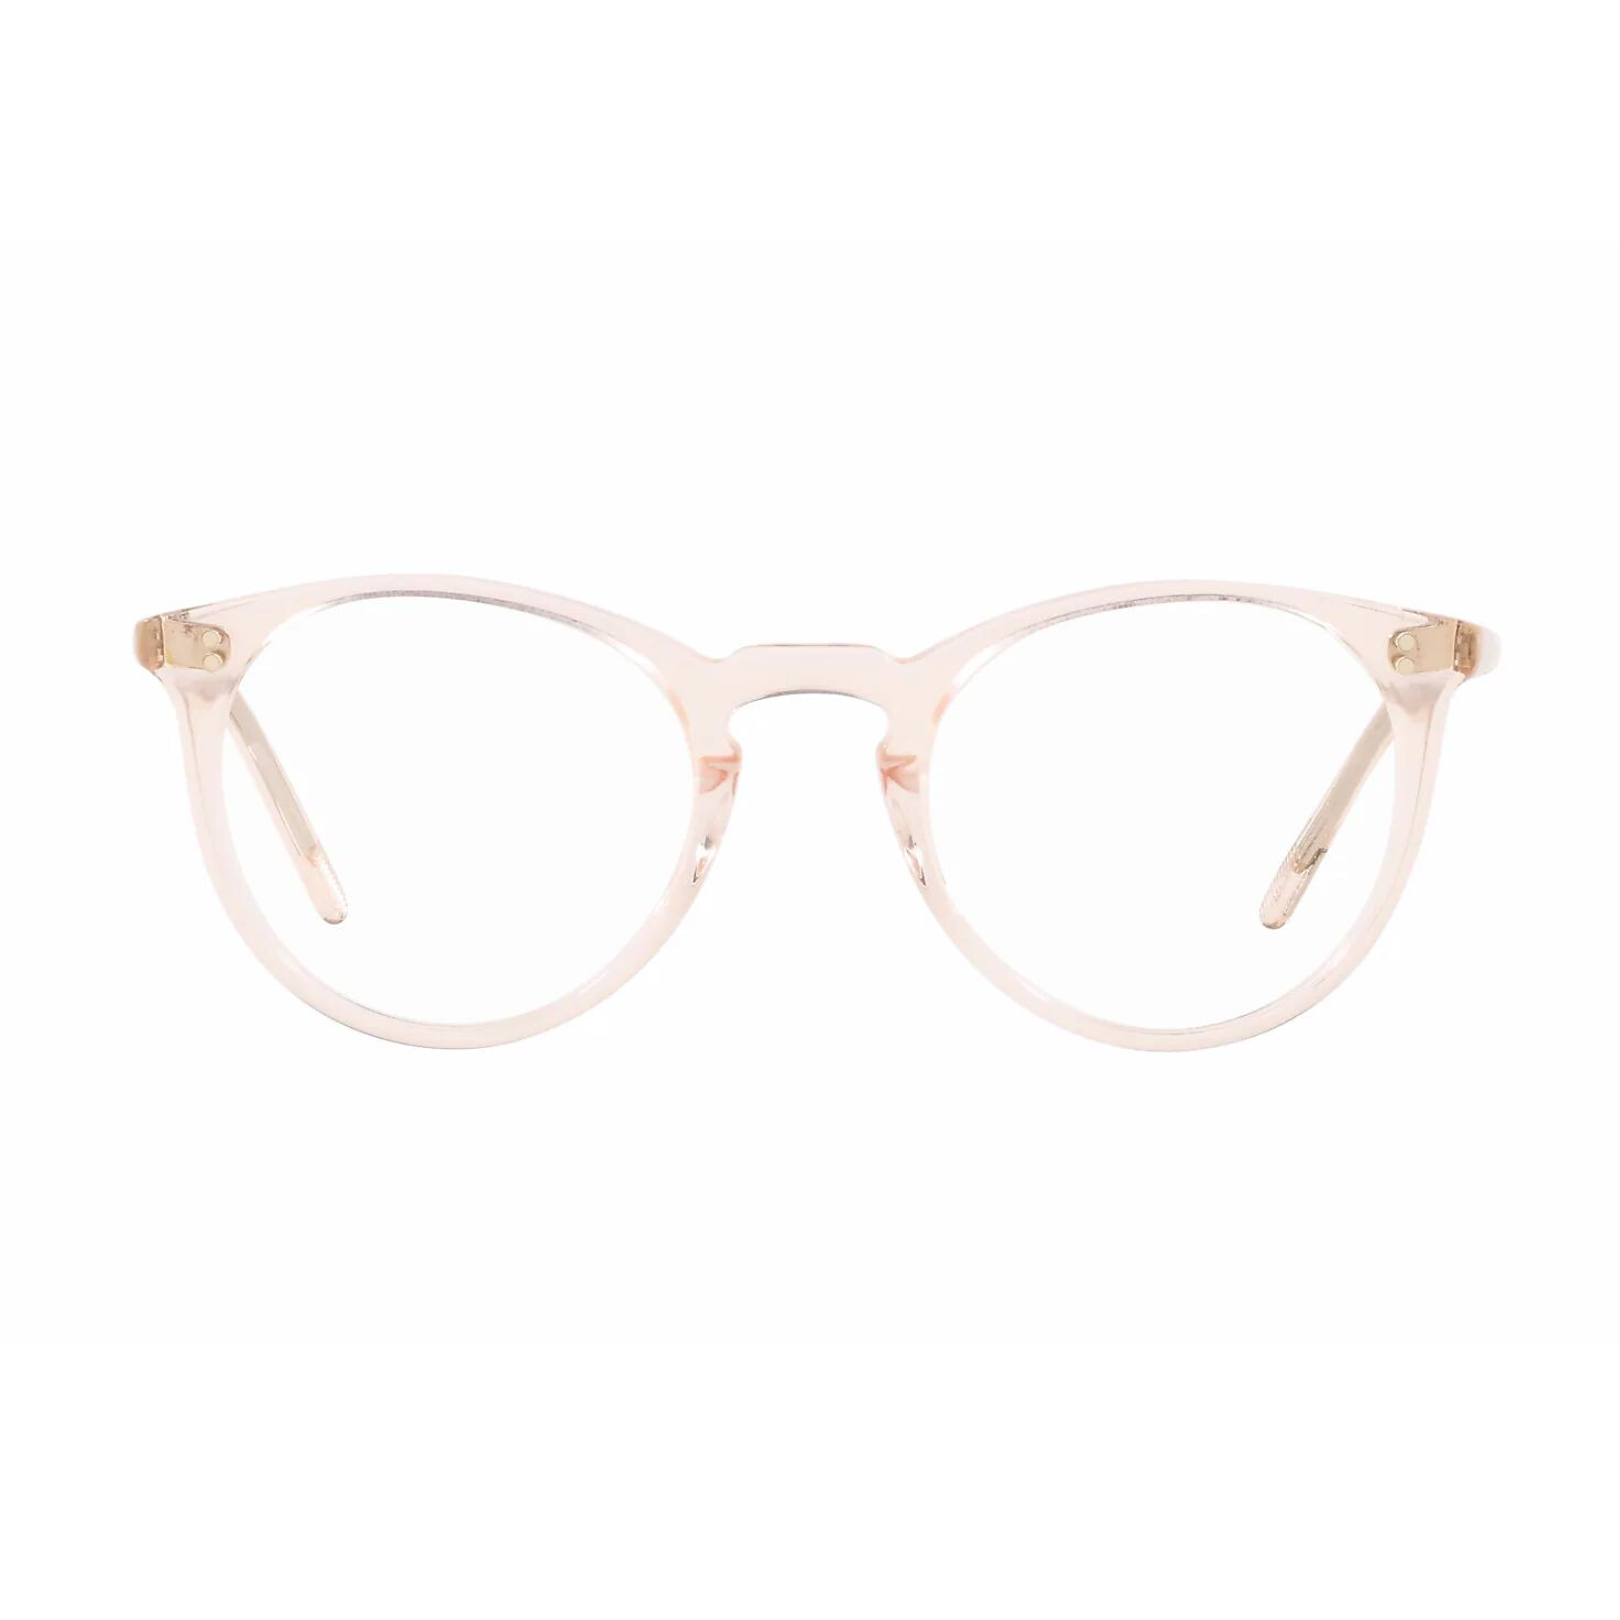 Oliver Peoples - O'Malley